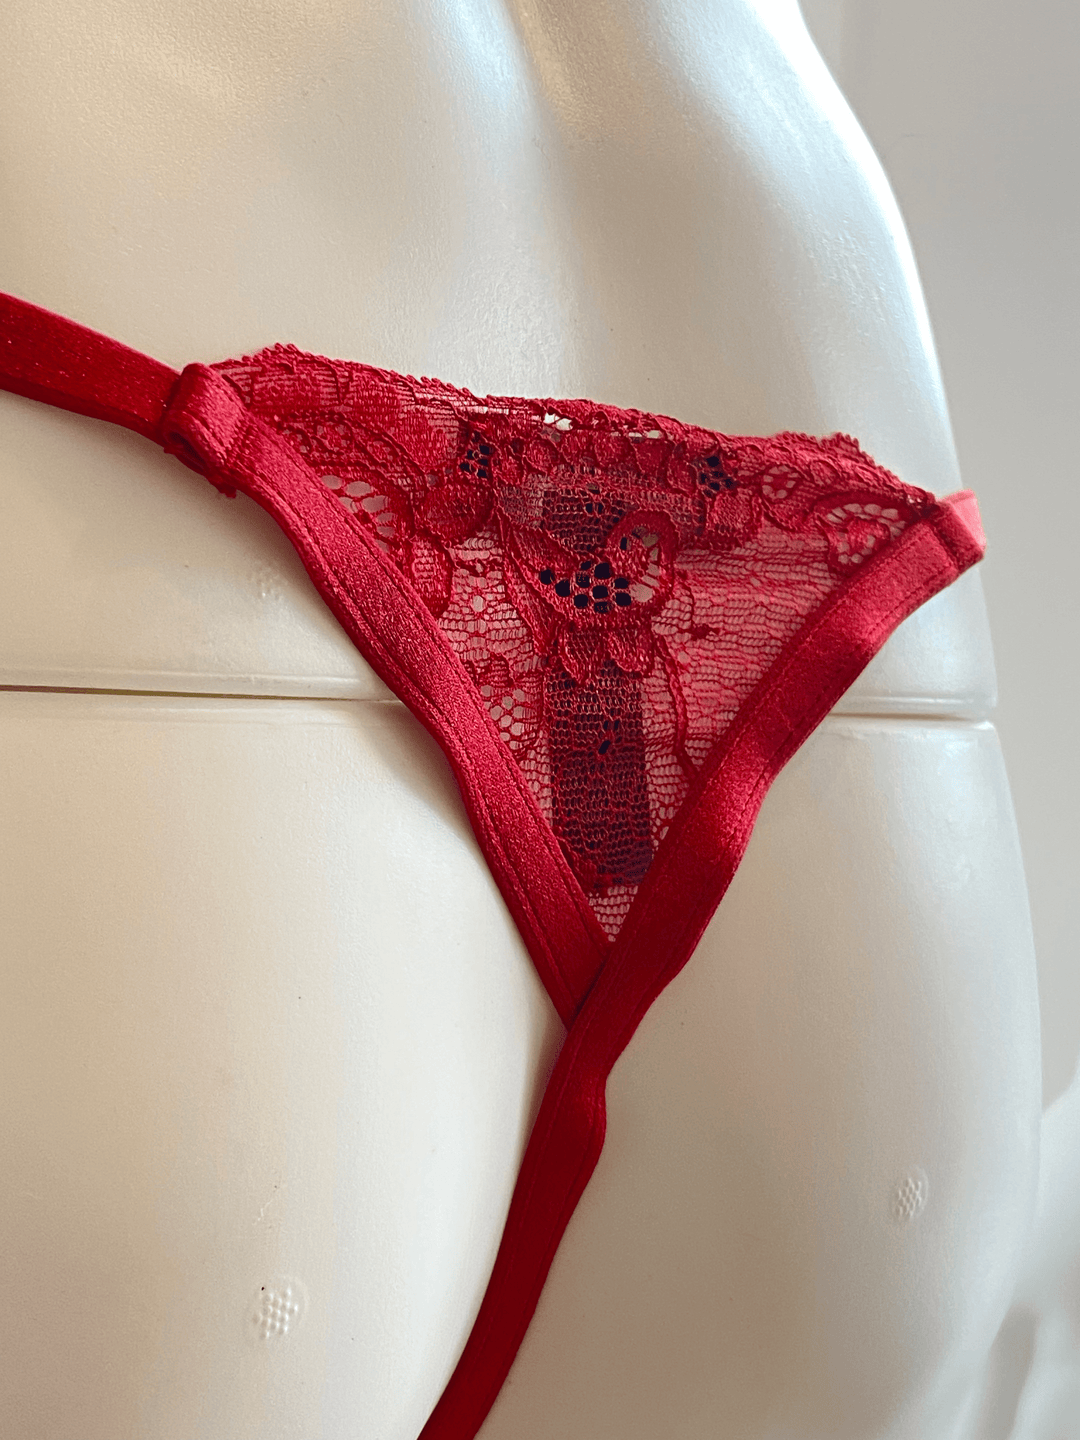 Samantha Chang thongs True Red / OS Samantha Chang All Lace Amour String Thong with Adjustable Strap